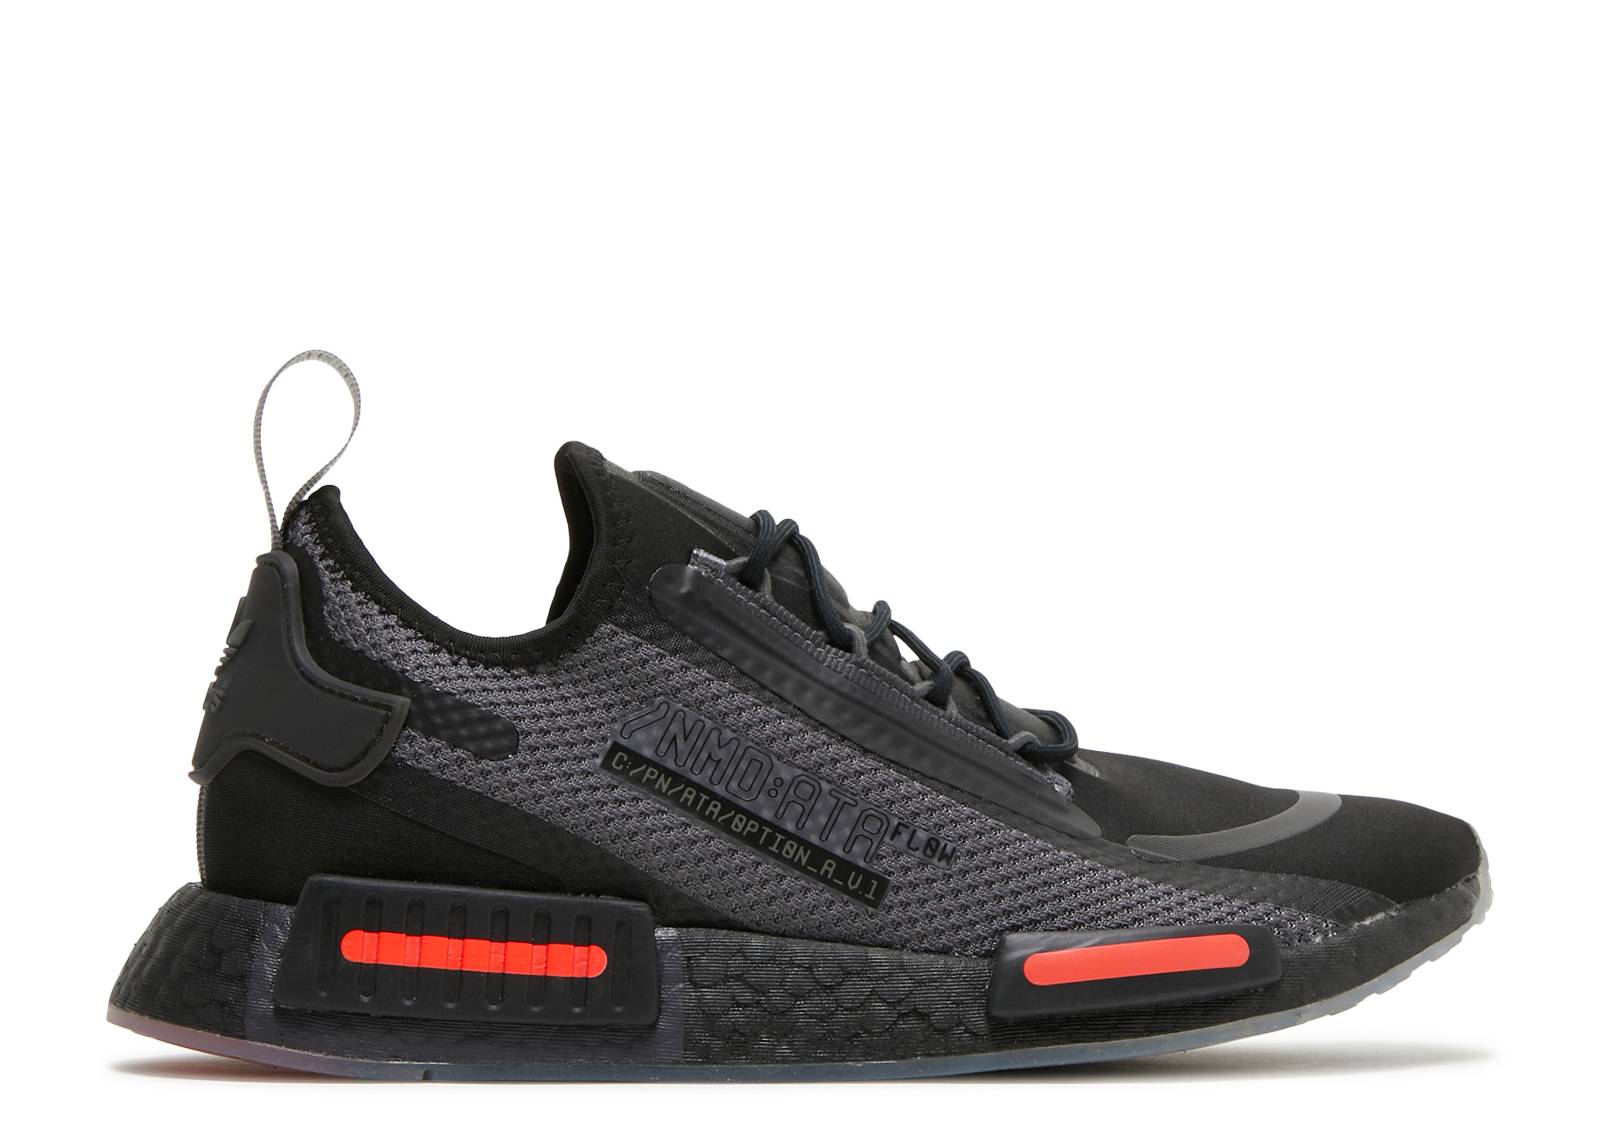 NMD_R1 Spectoo 'Black Solar Red'